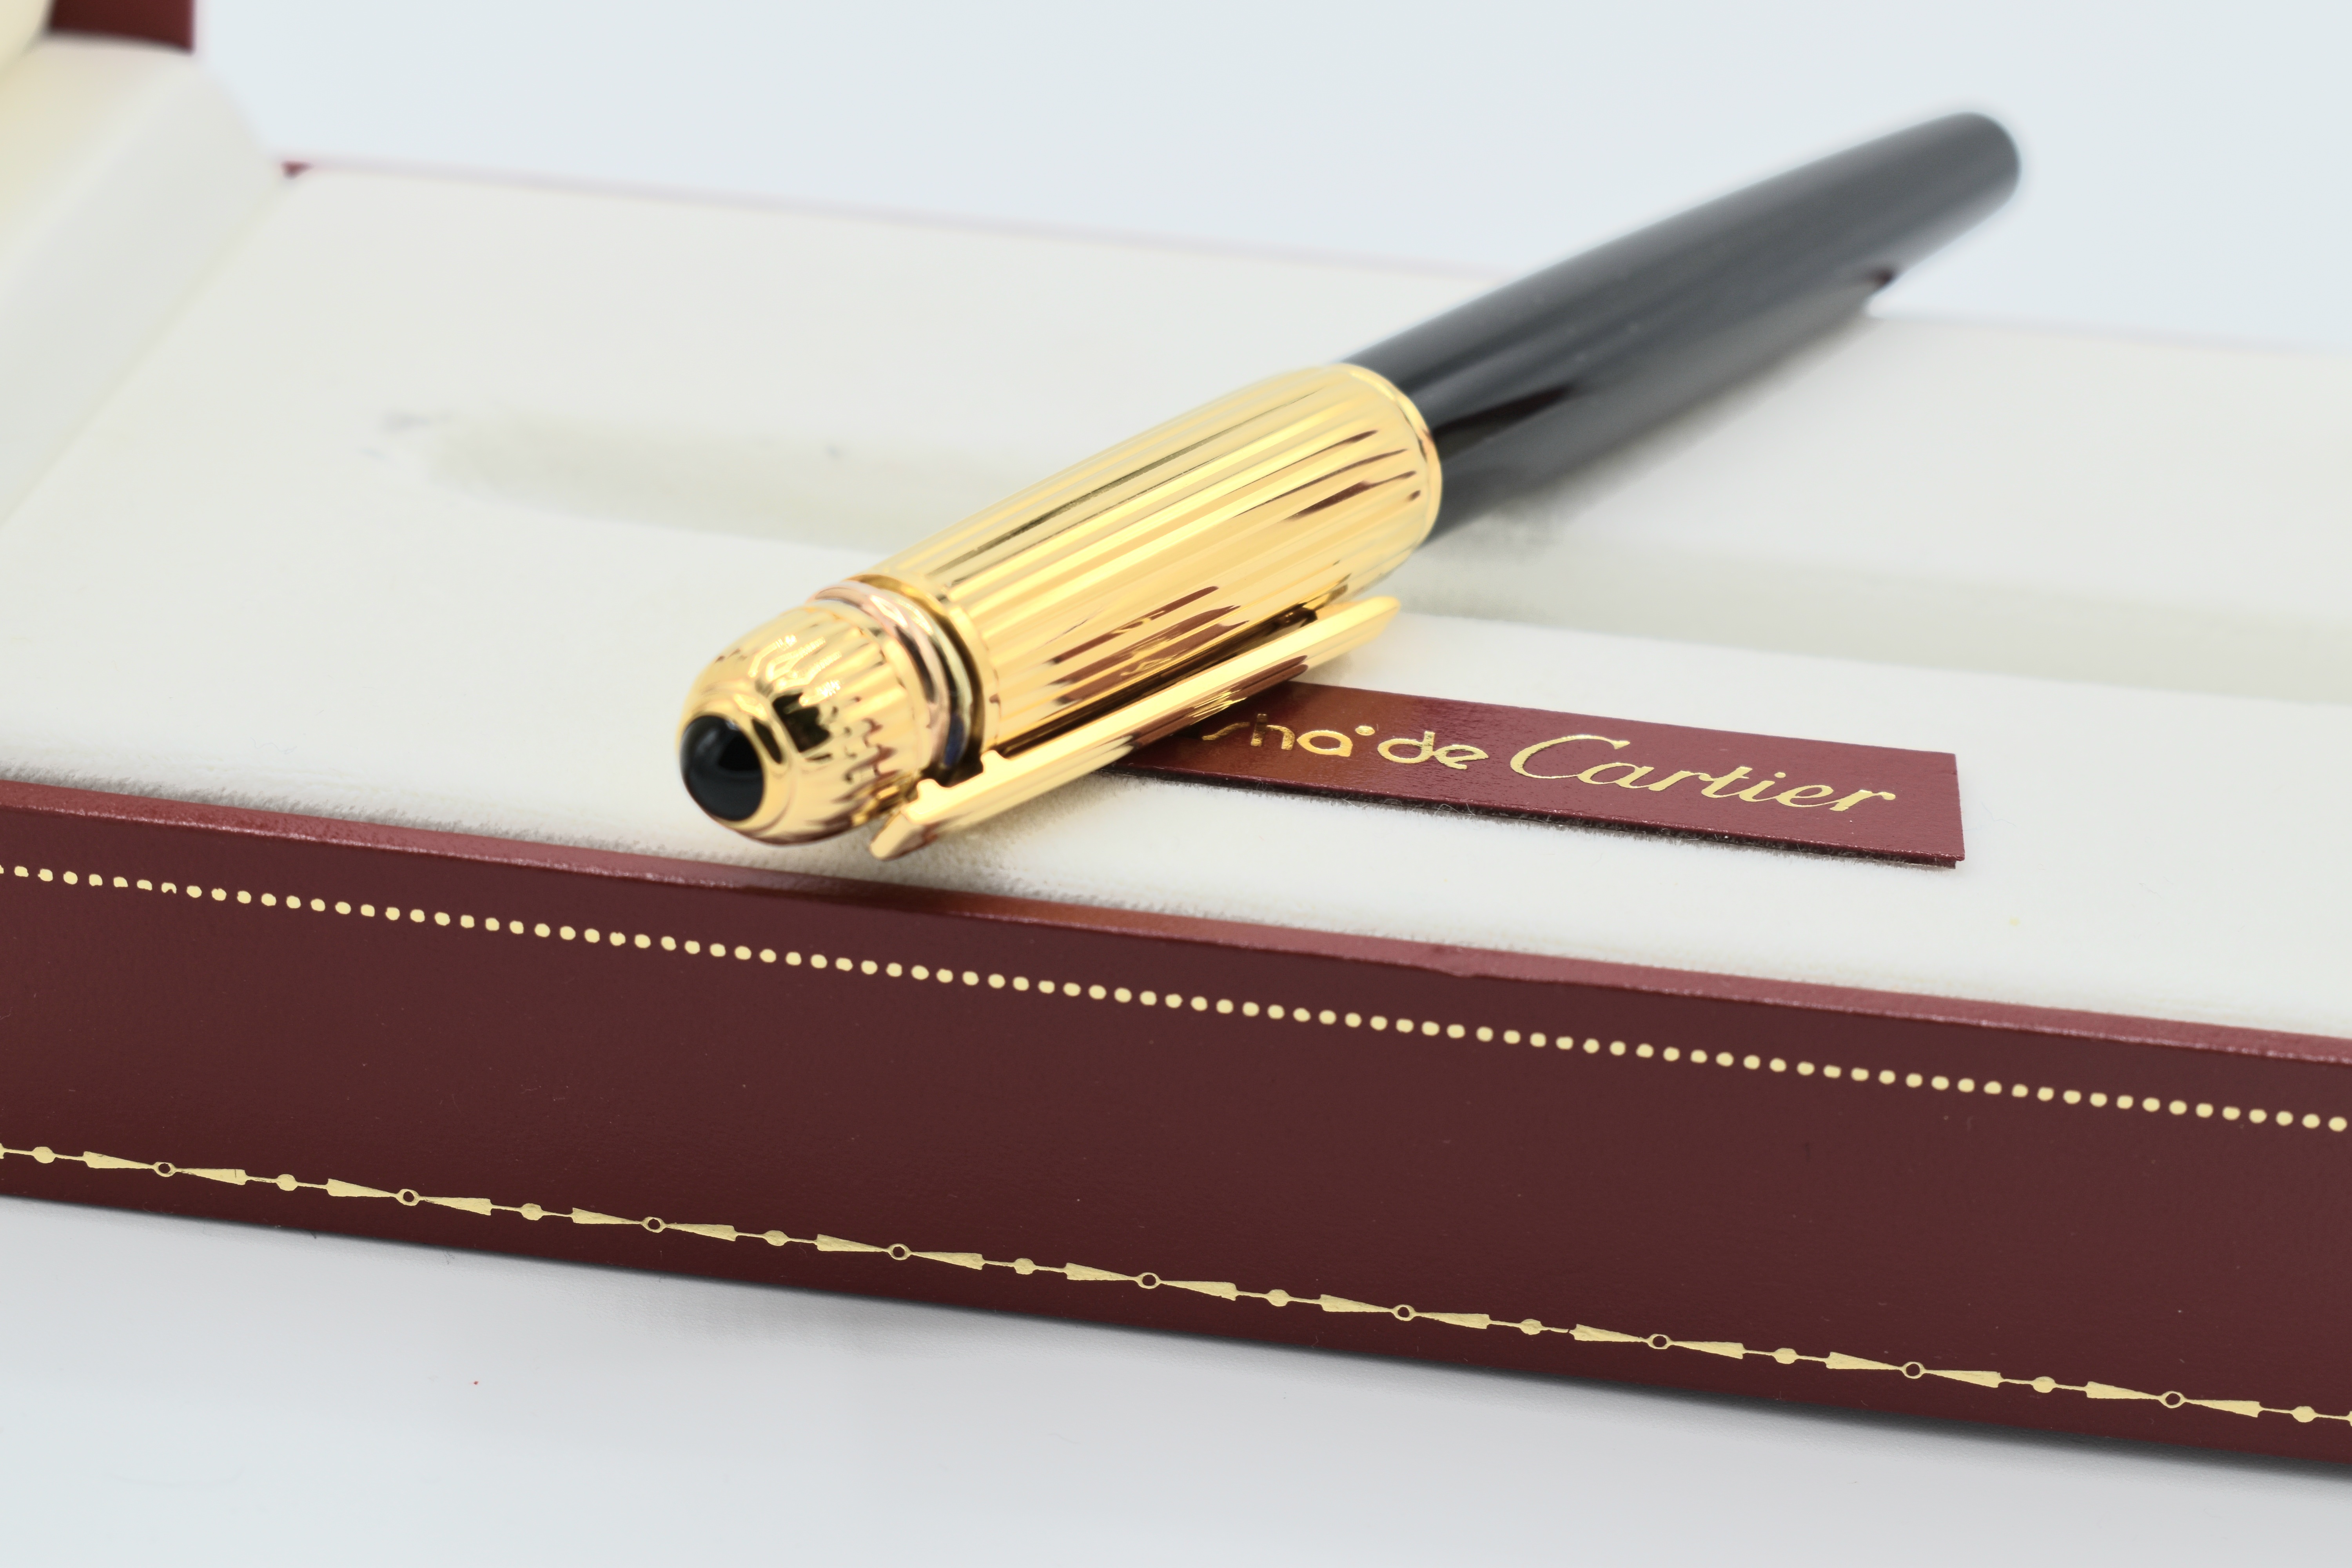 Brand New - Extremely Rare - Pasha De Cartier - Black Lacquer and Gold Fountain Pen - 1985 - Image 5 of 10